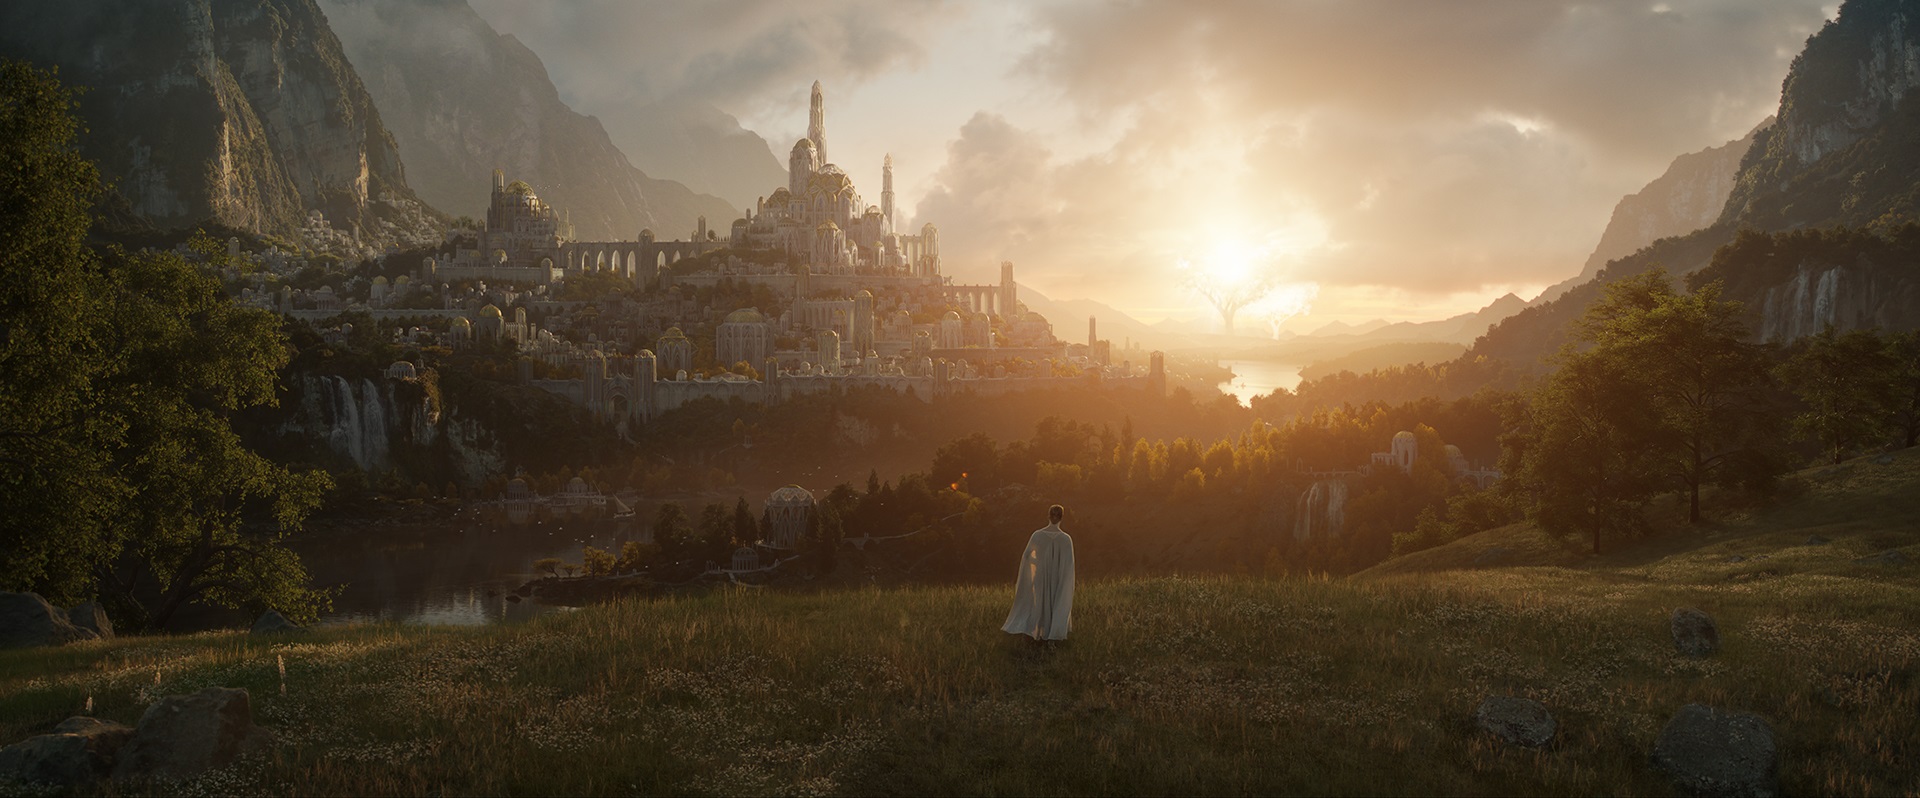 Amazon's LORD OF THE RINGS Series Gets First Look Image and Premiere Date